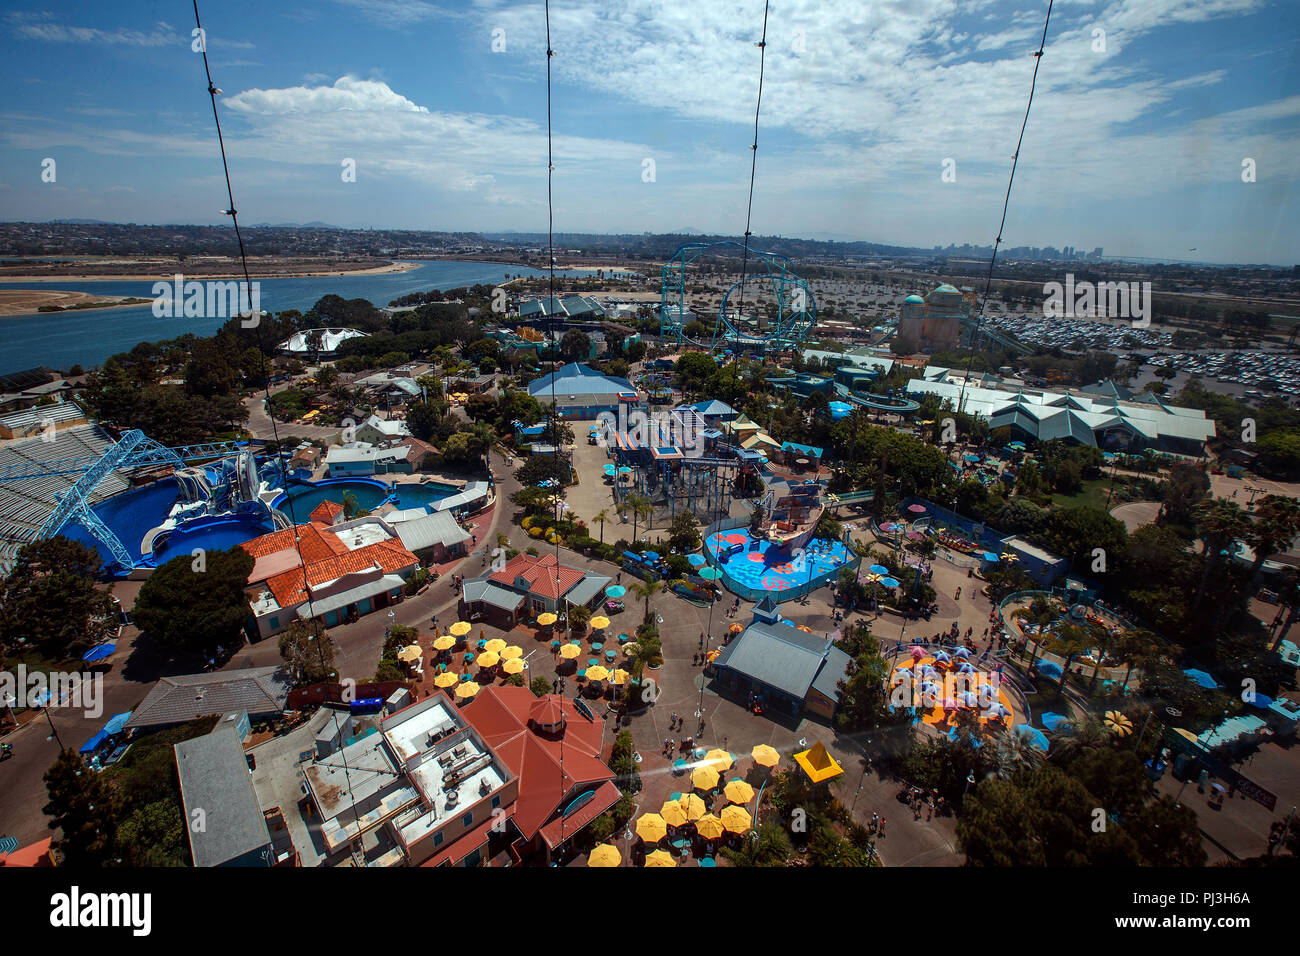 Aerial view of Sea World, San Diego, California, United States of America Stock Photo